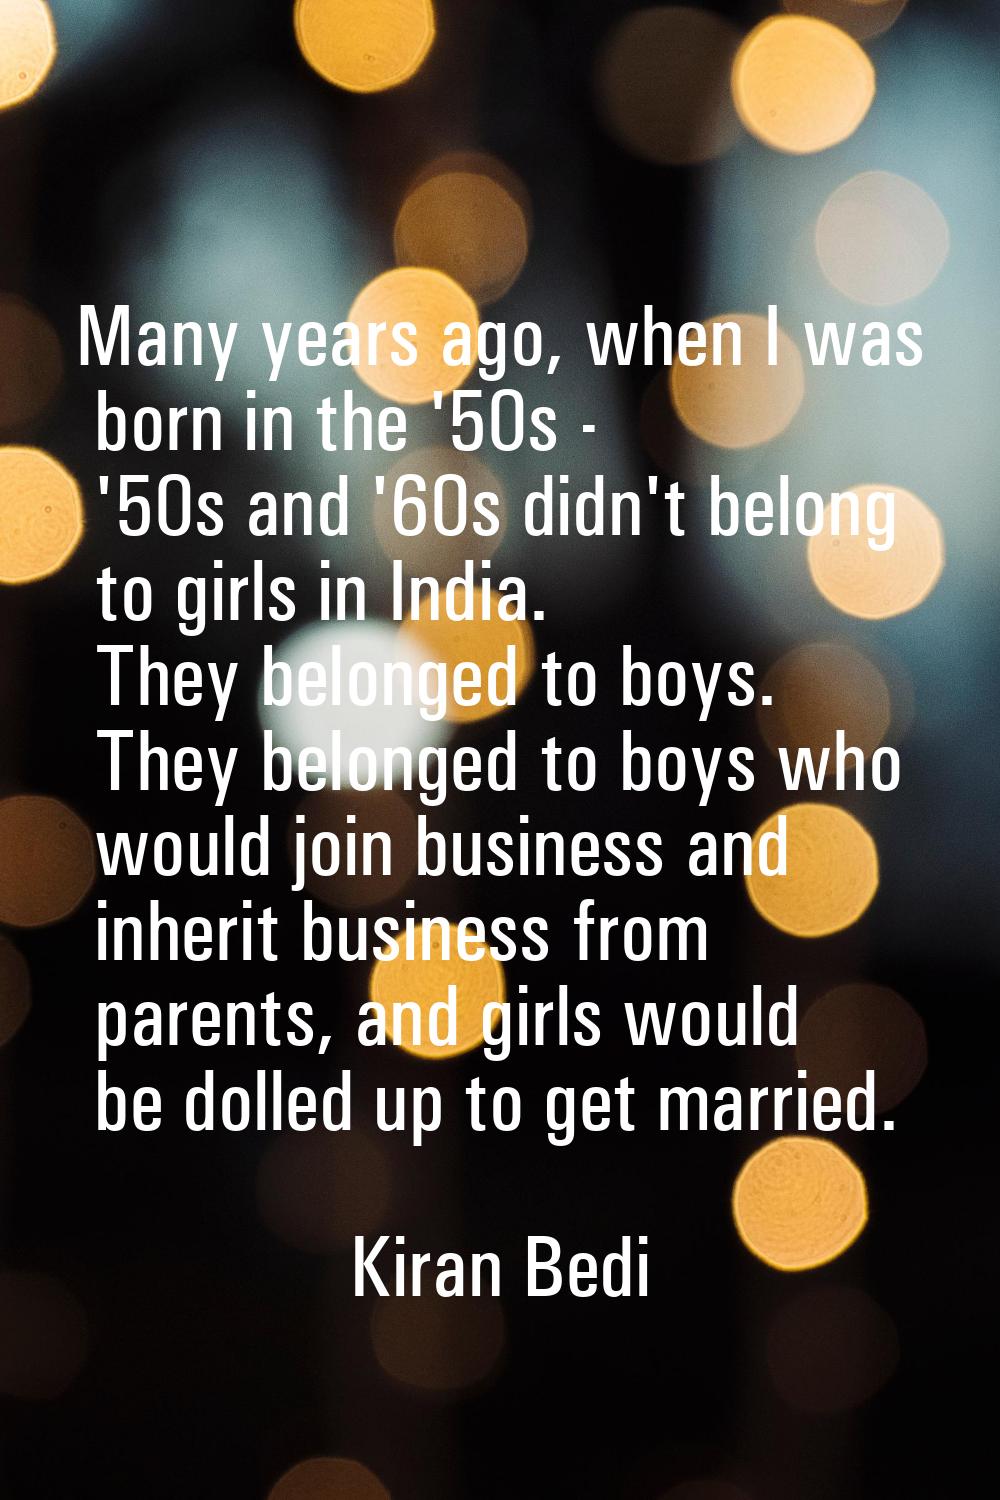 Many years ago, when I was born in the '50s - '50s and '60s didn't belong to girls in India. They b